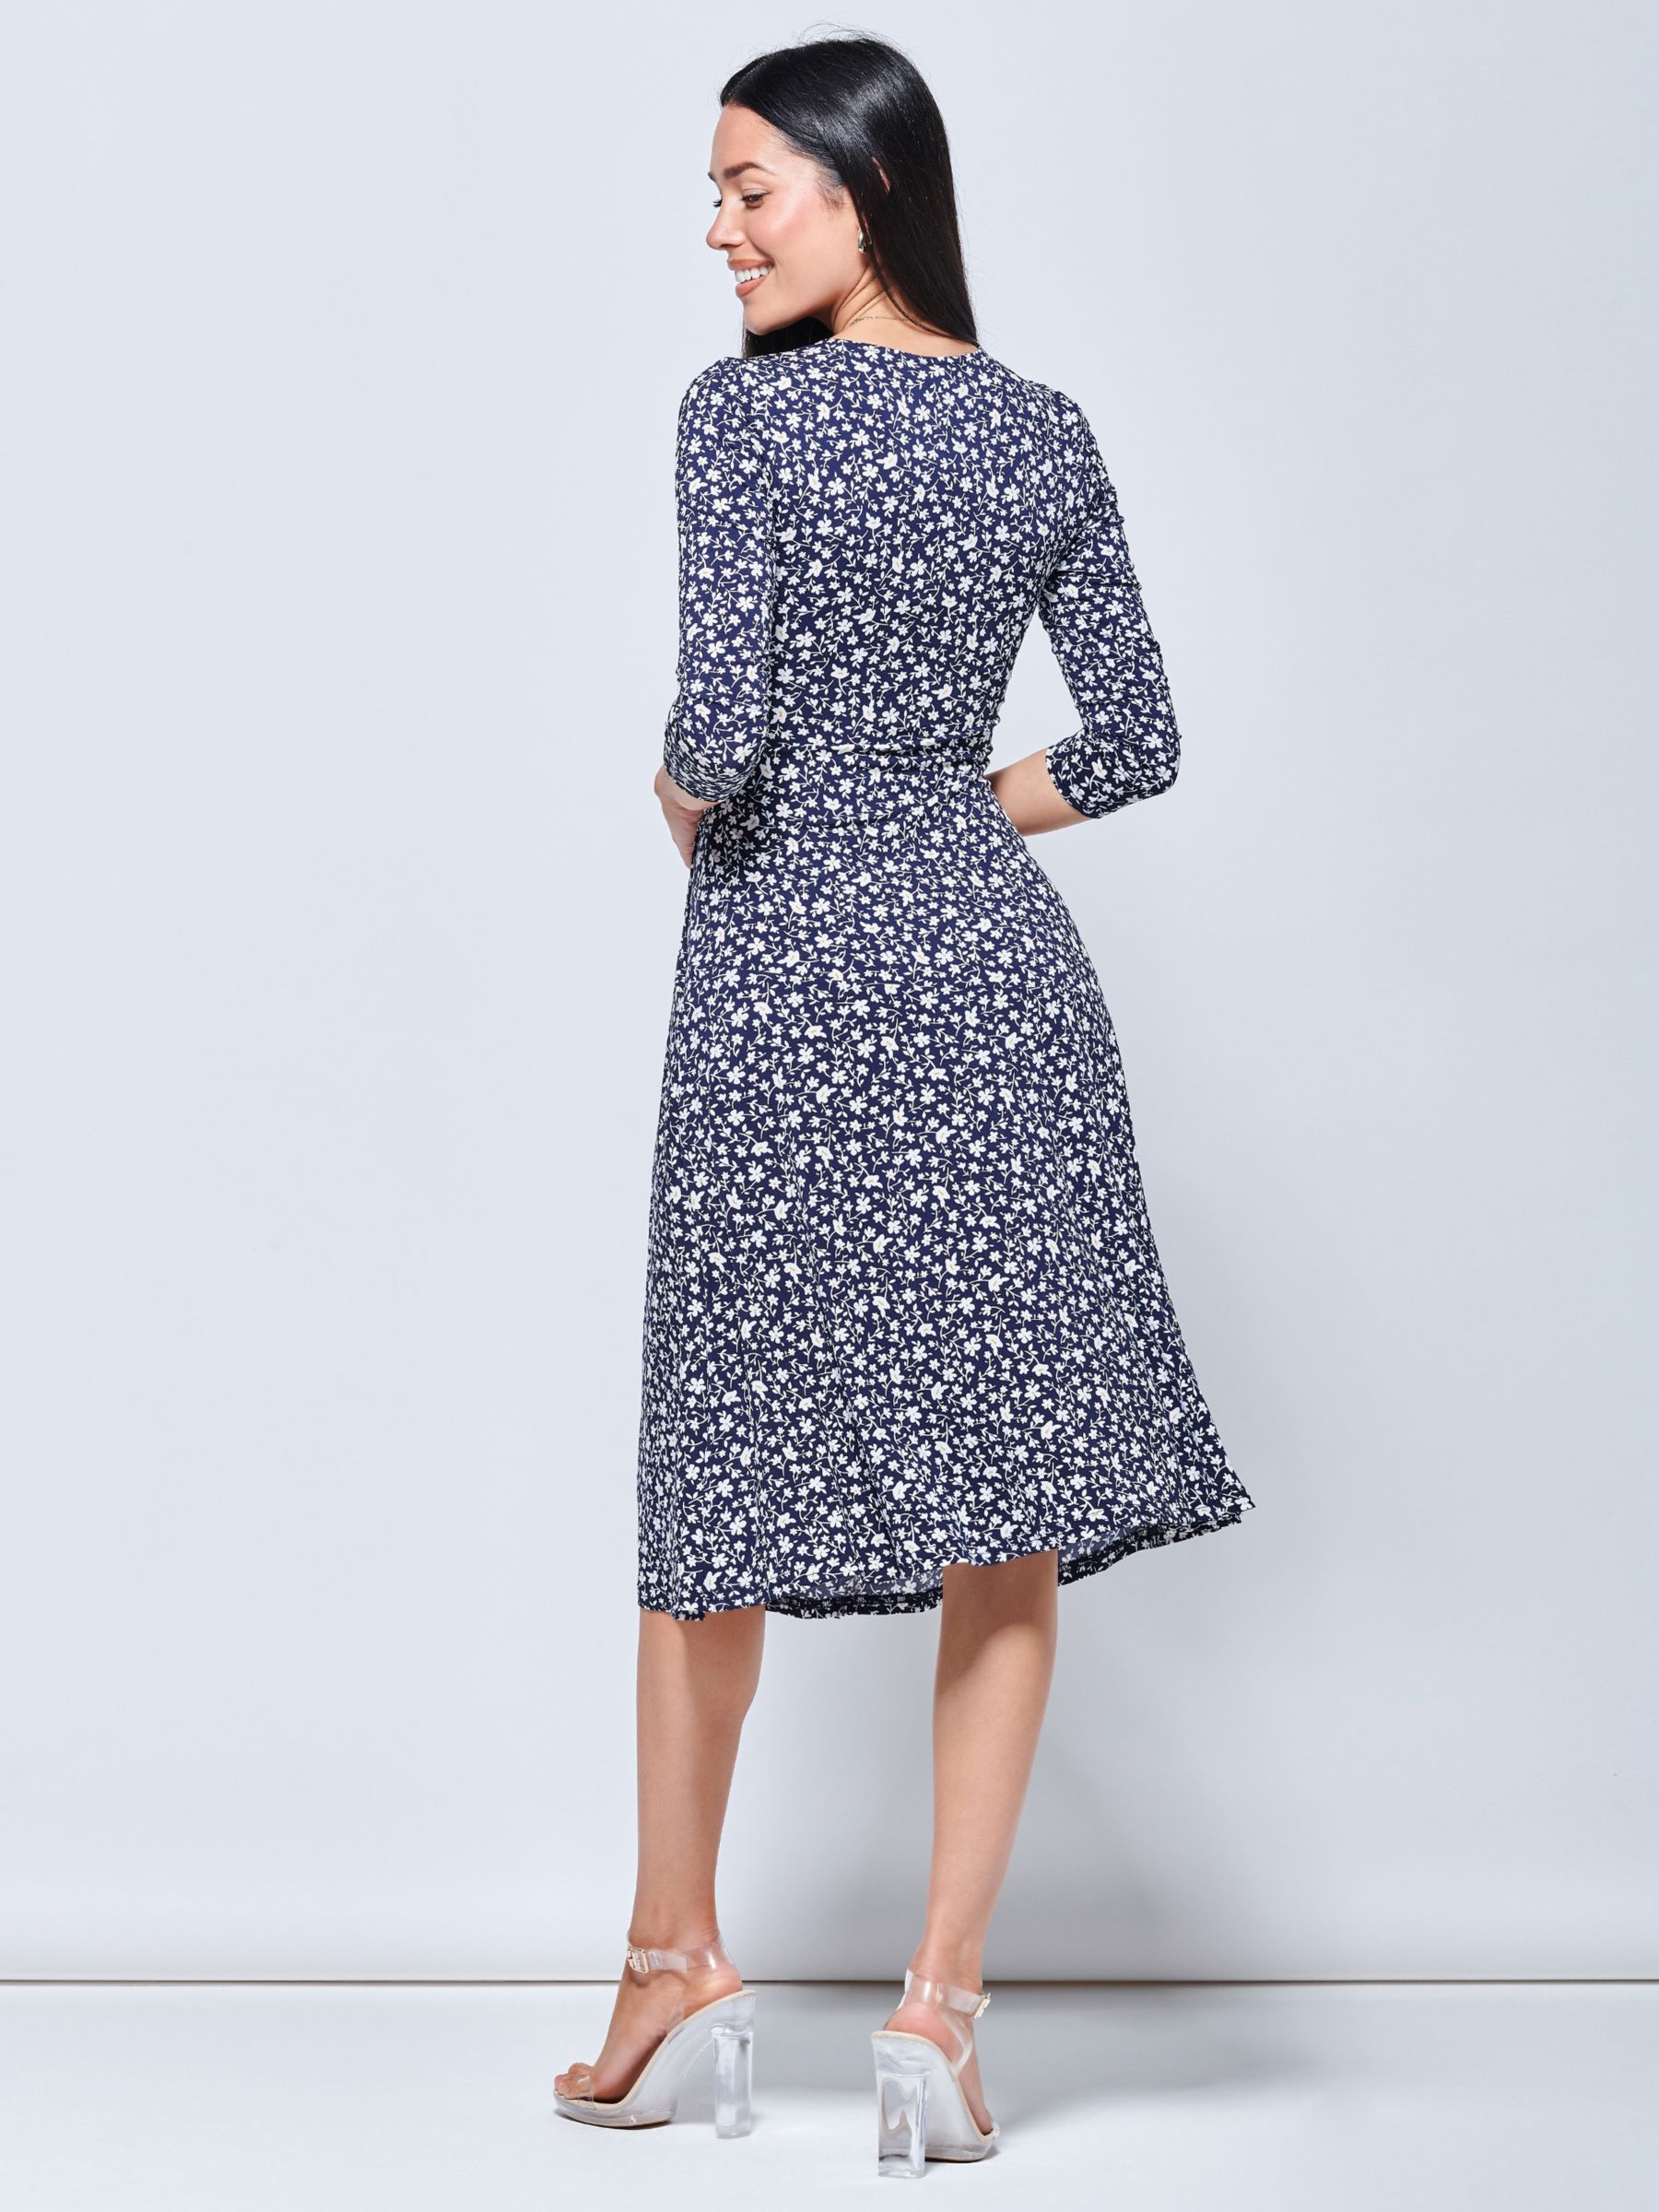 Jolie Moi Gretta Floral Print Jersey Fit and Flare Dress, Navy, 14